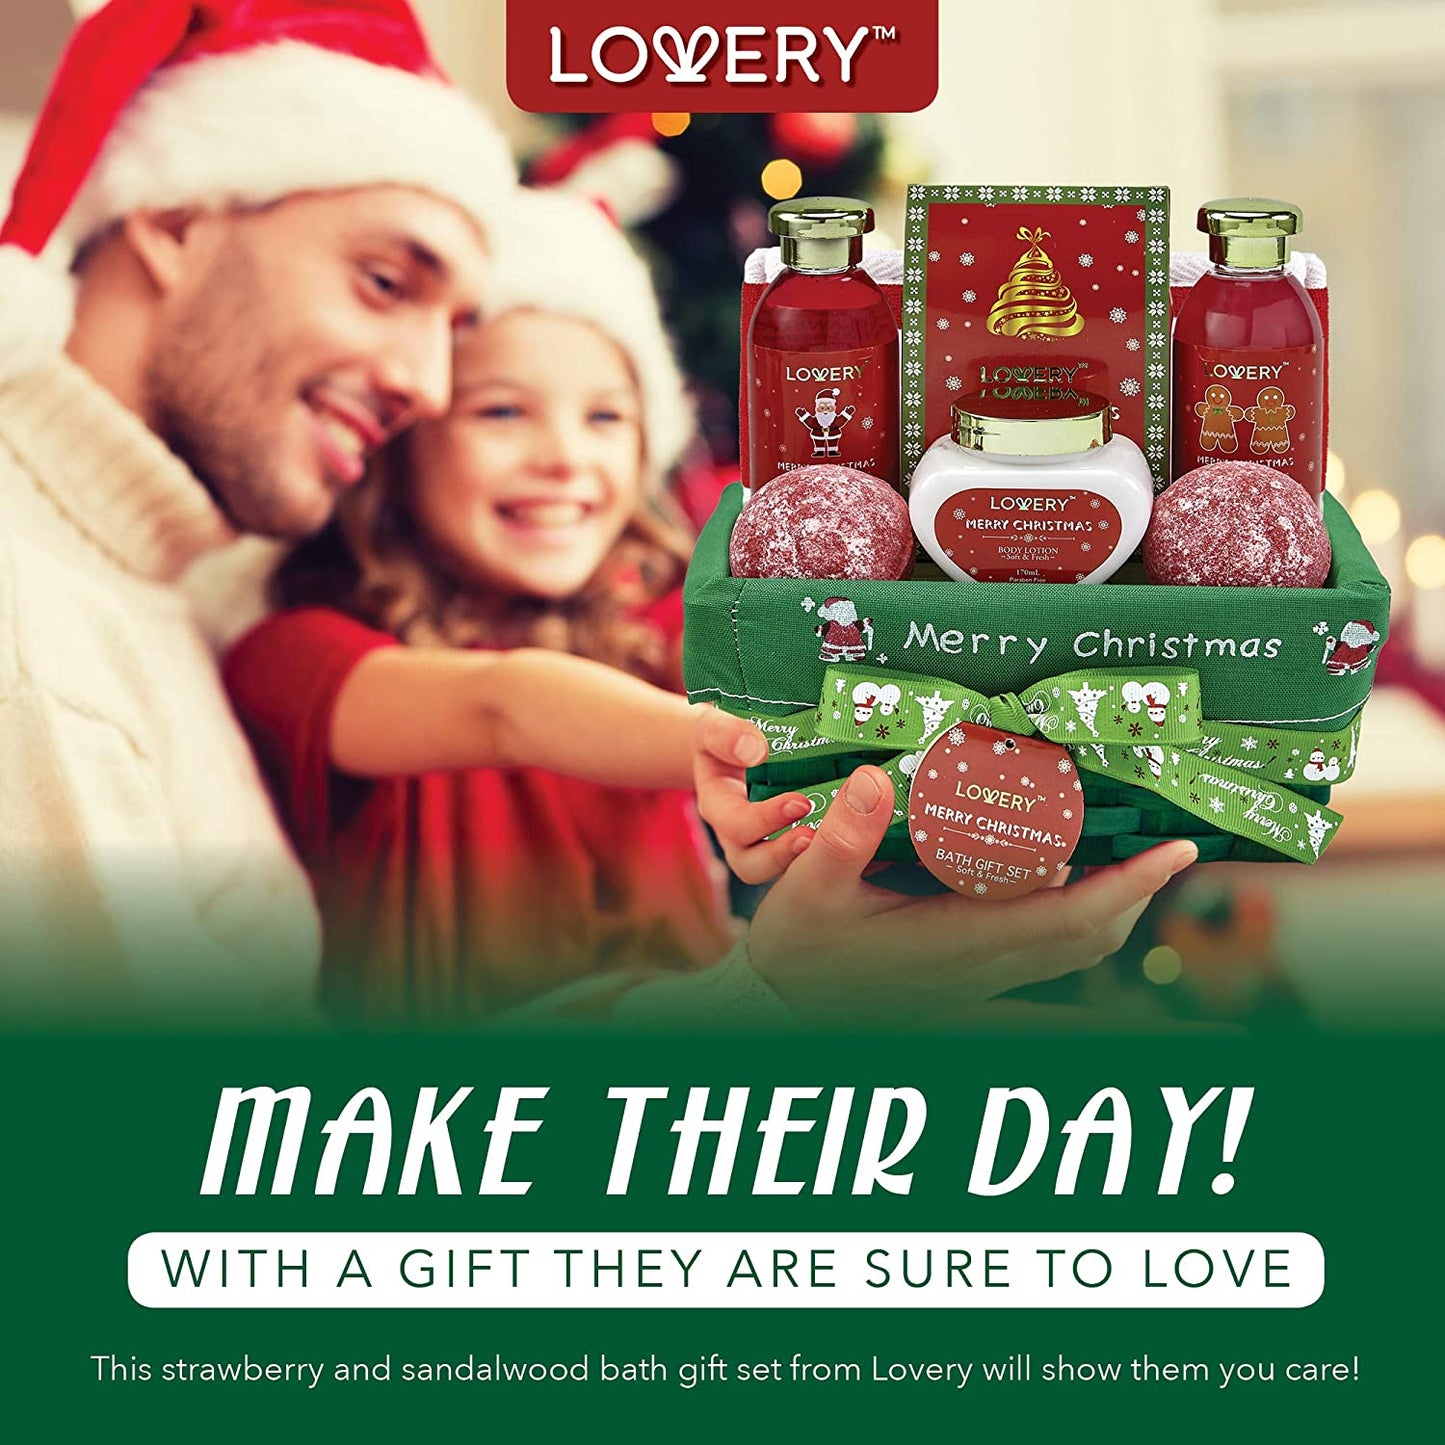 lovery Merry Christmas Gift, lovery Strawberry Sandalwood, Merry Christmas Gift, Christmas Bath Bliss, Festive Bath Bomb Set, Holiday Spa Treats, Fruity Fragrance Delight, Calming Bath Essentials, Christmas Relaxation, Luxe Holiday Spa, Skin-Pampering Gift, Aromatherapy Spa Set, Stress Relief for Christmas